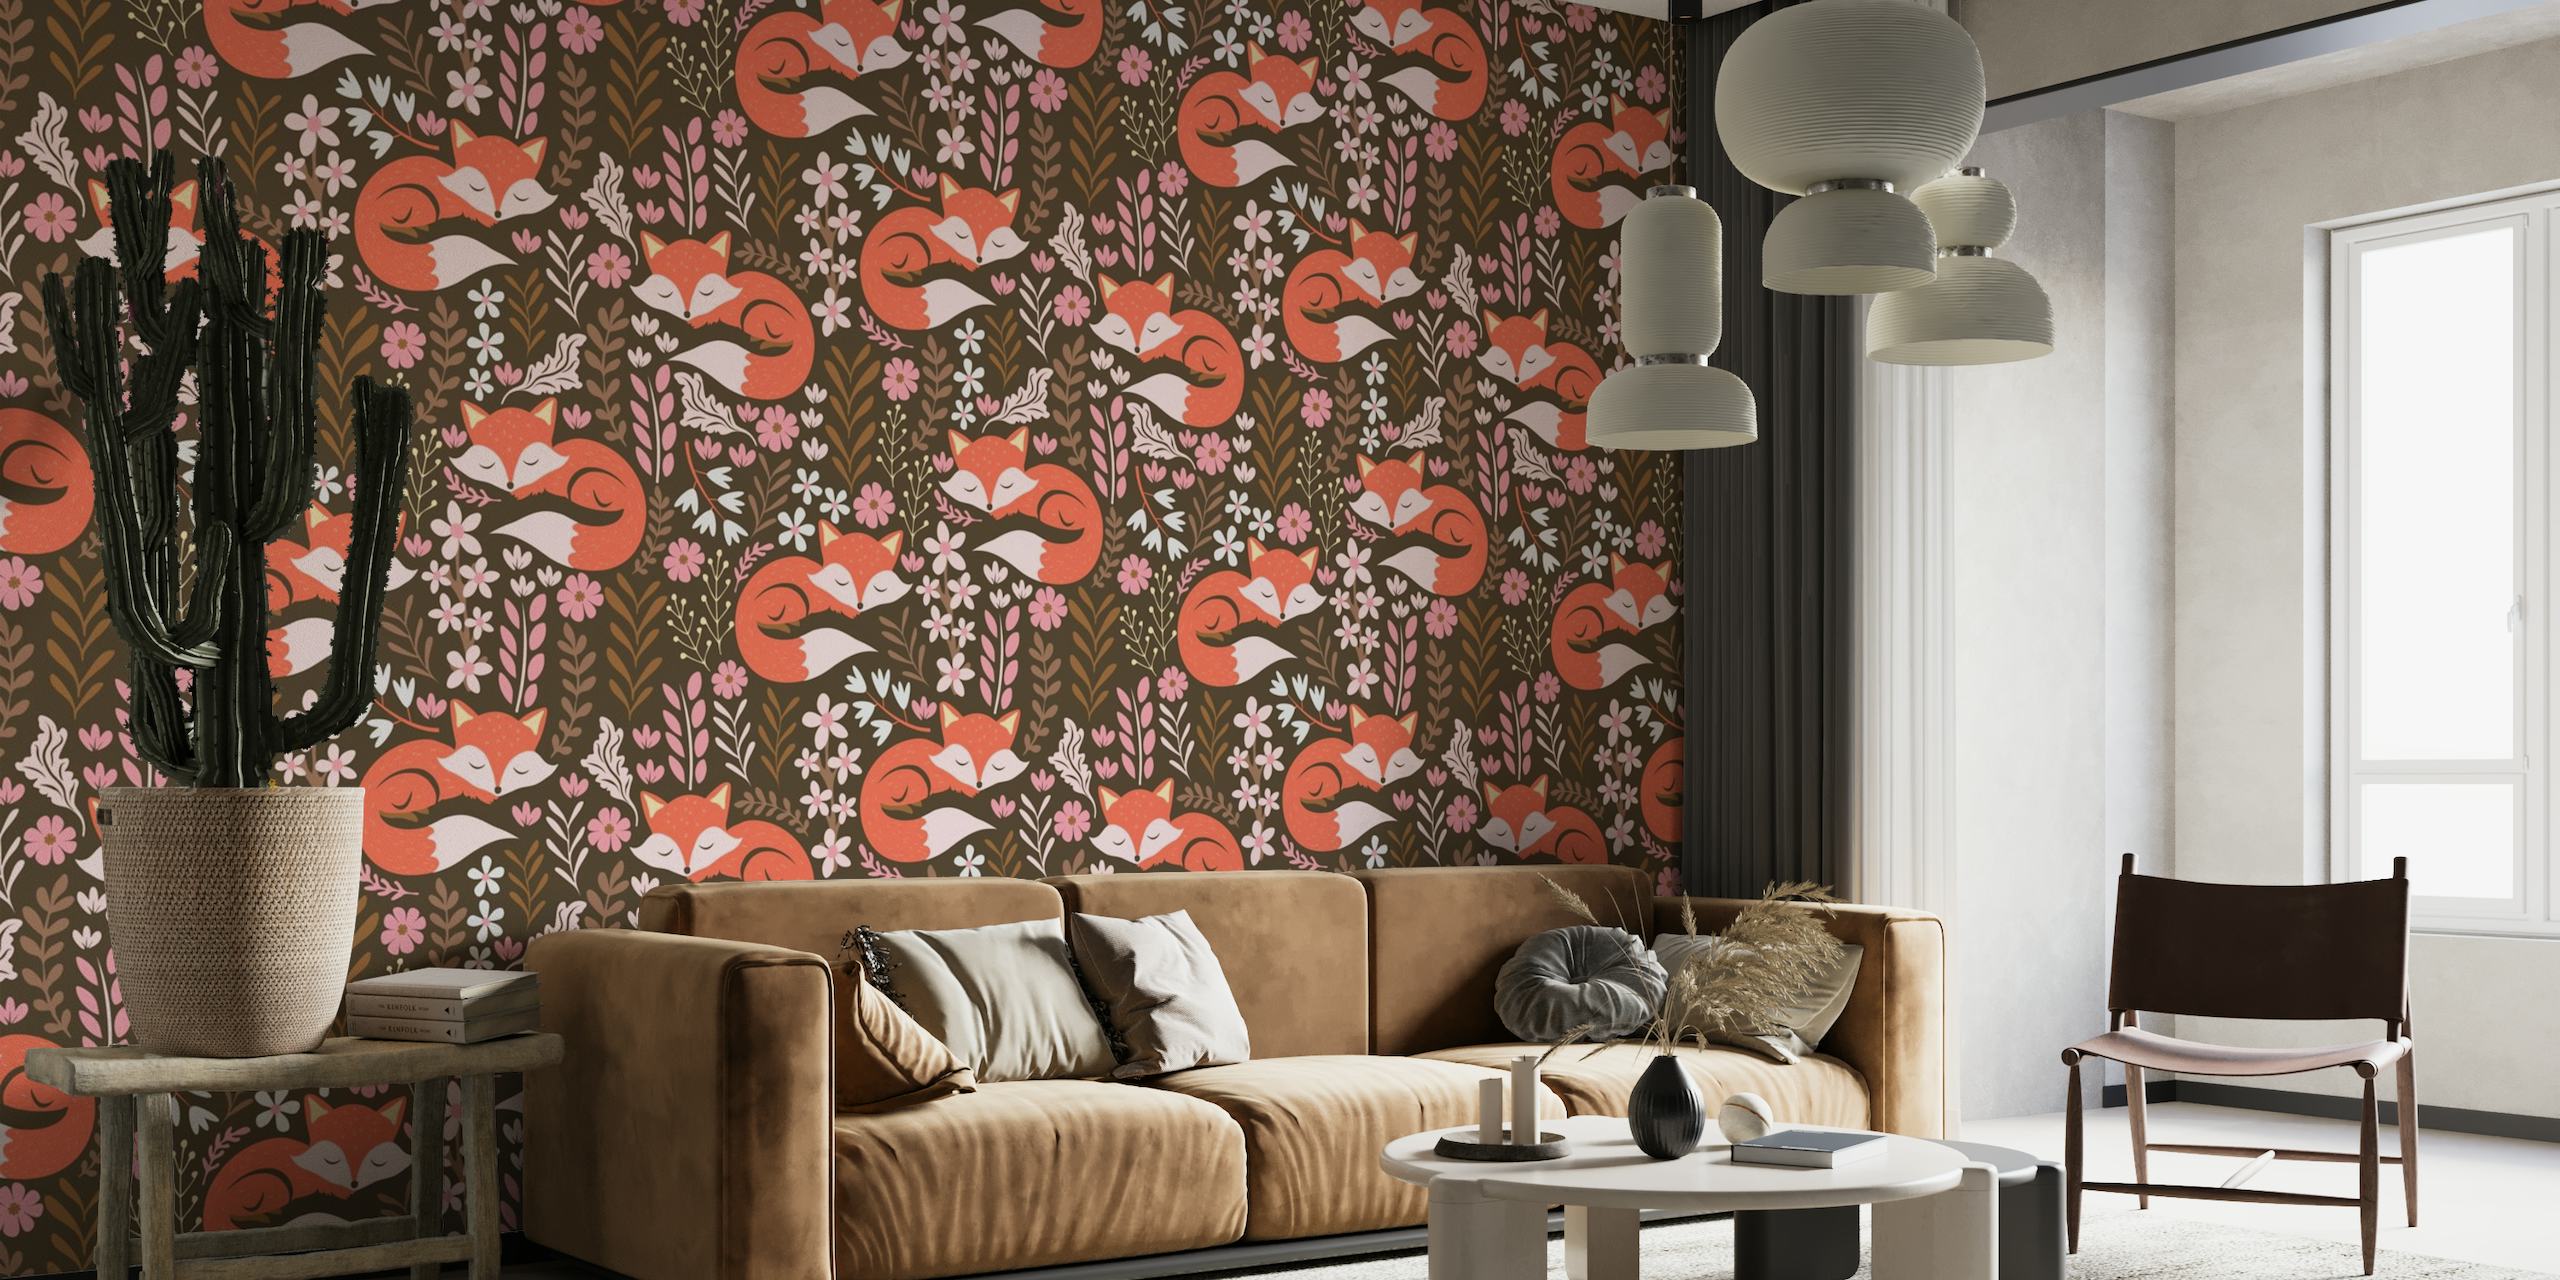 Sleepy foxes with floral background wall mural